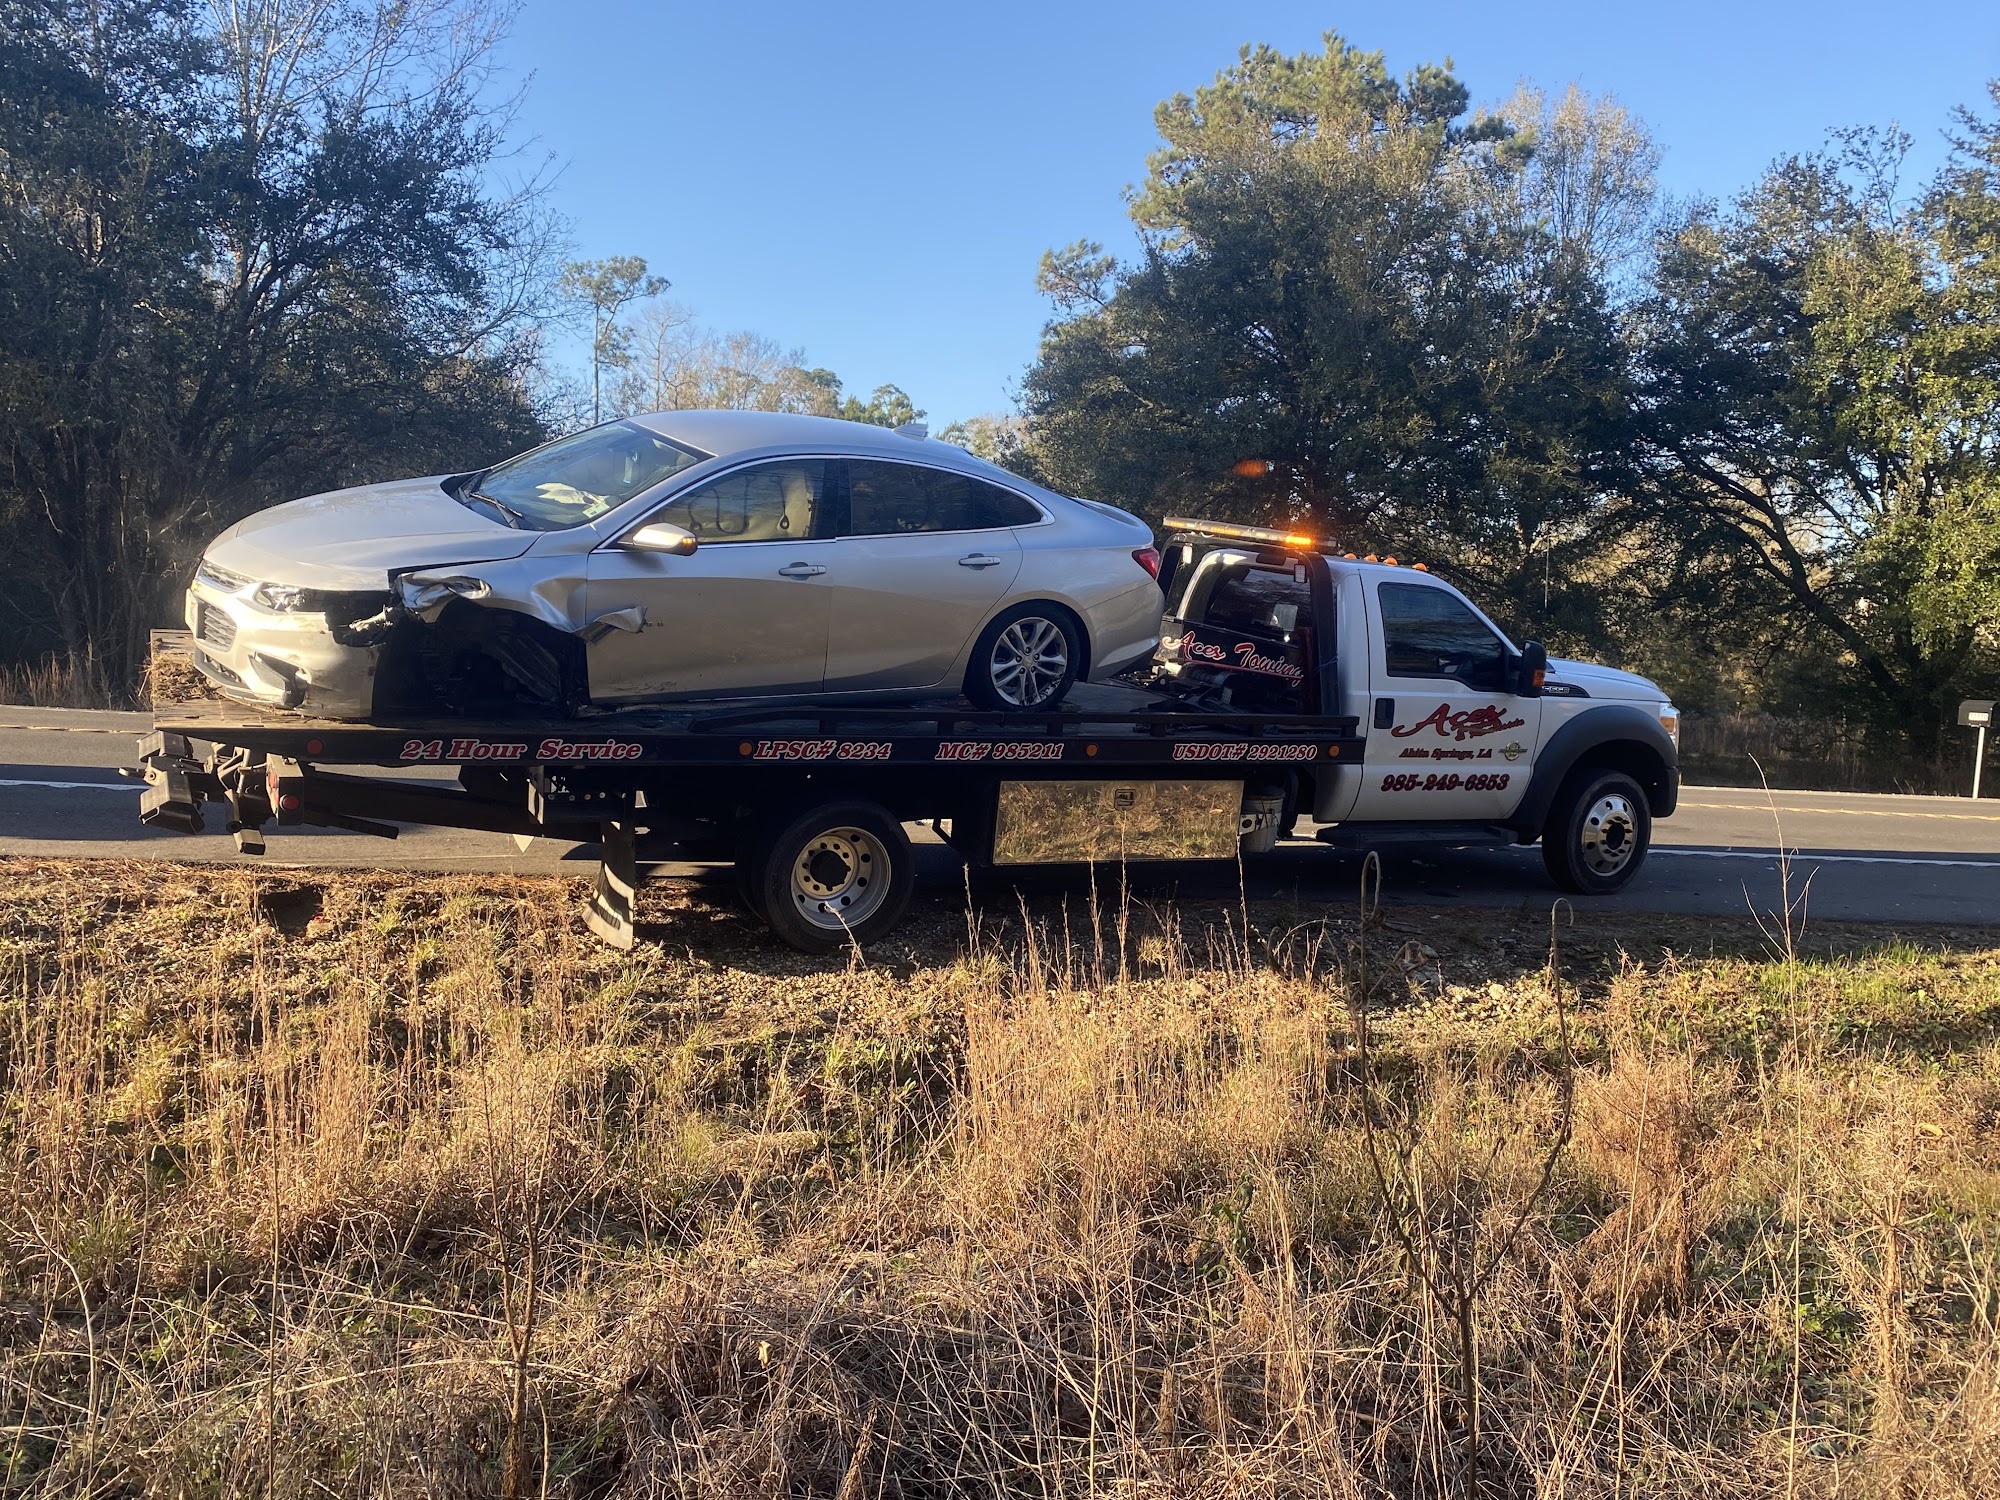 Aces Towing and Roadside Assistance